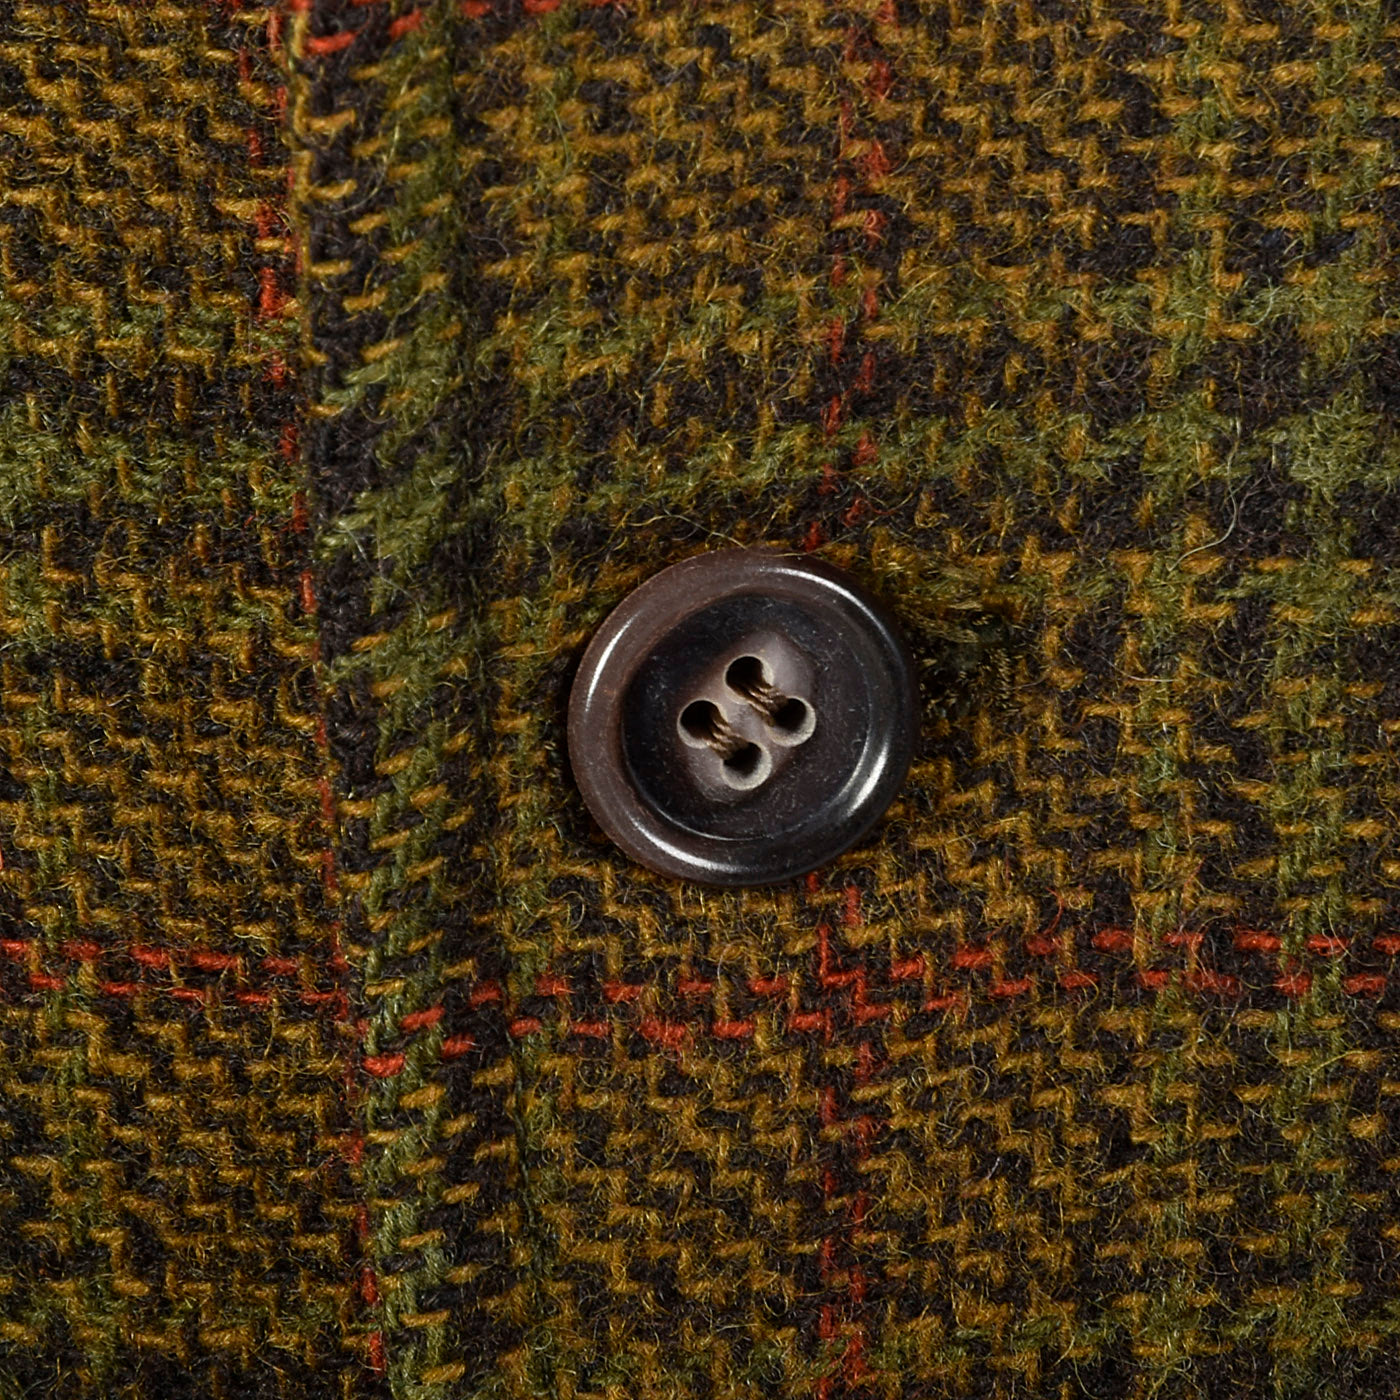 1960s Mens Brown and Red Plaid Jacket